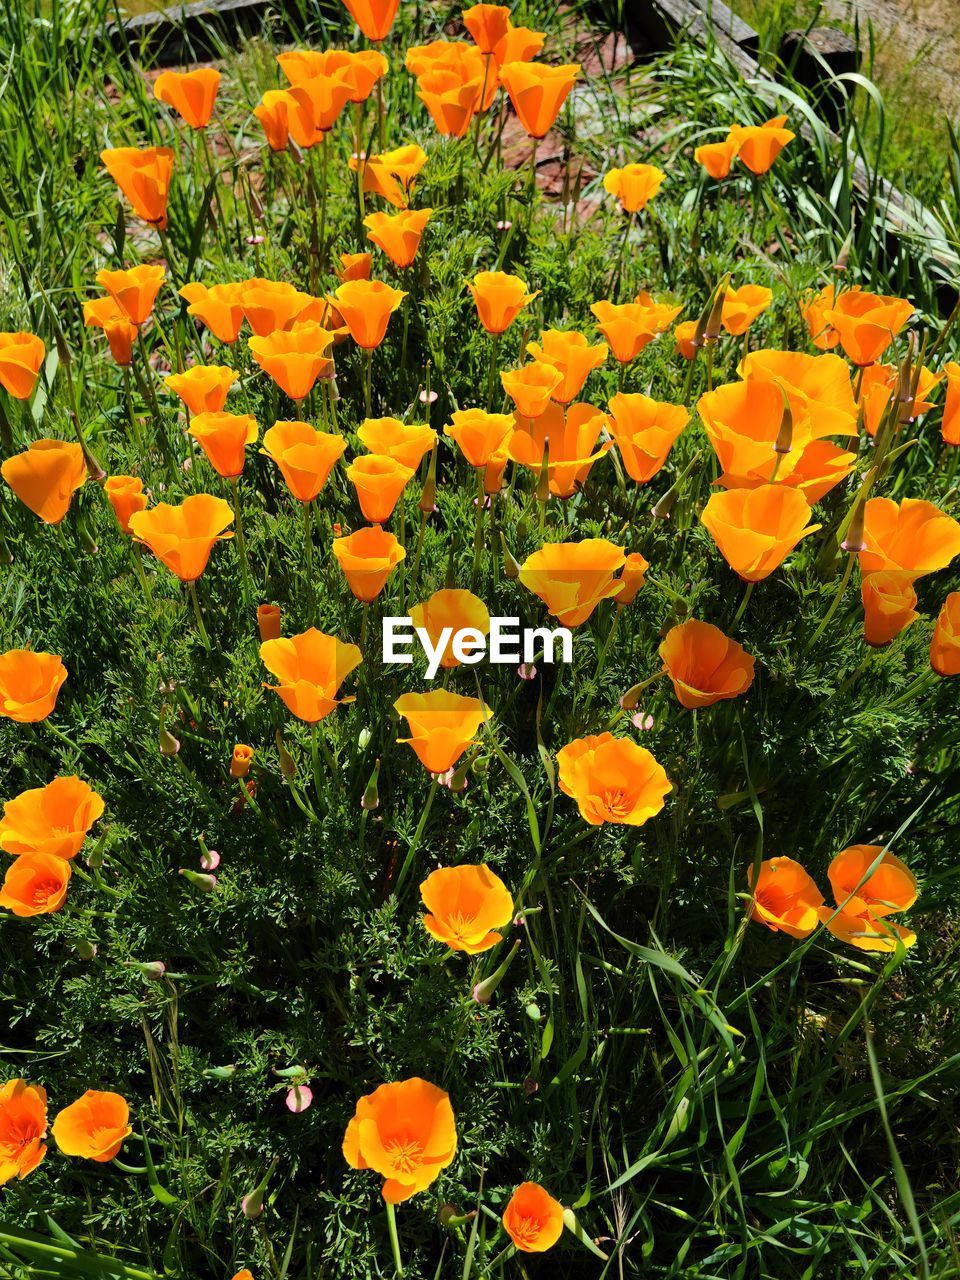 plant, growth, flowering plant, flower, freshness, beauty in nature, orange color, nature, fragility, no people, day, field, poppy, wildflower, high angle view, land, petal, flower head, close-up, inflorescence, outdoors, green, meadow, yellow, grass, botany, full frame, plant part, leaf